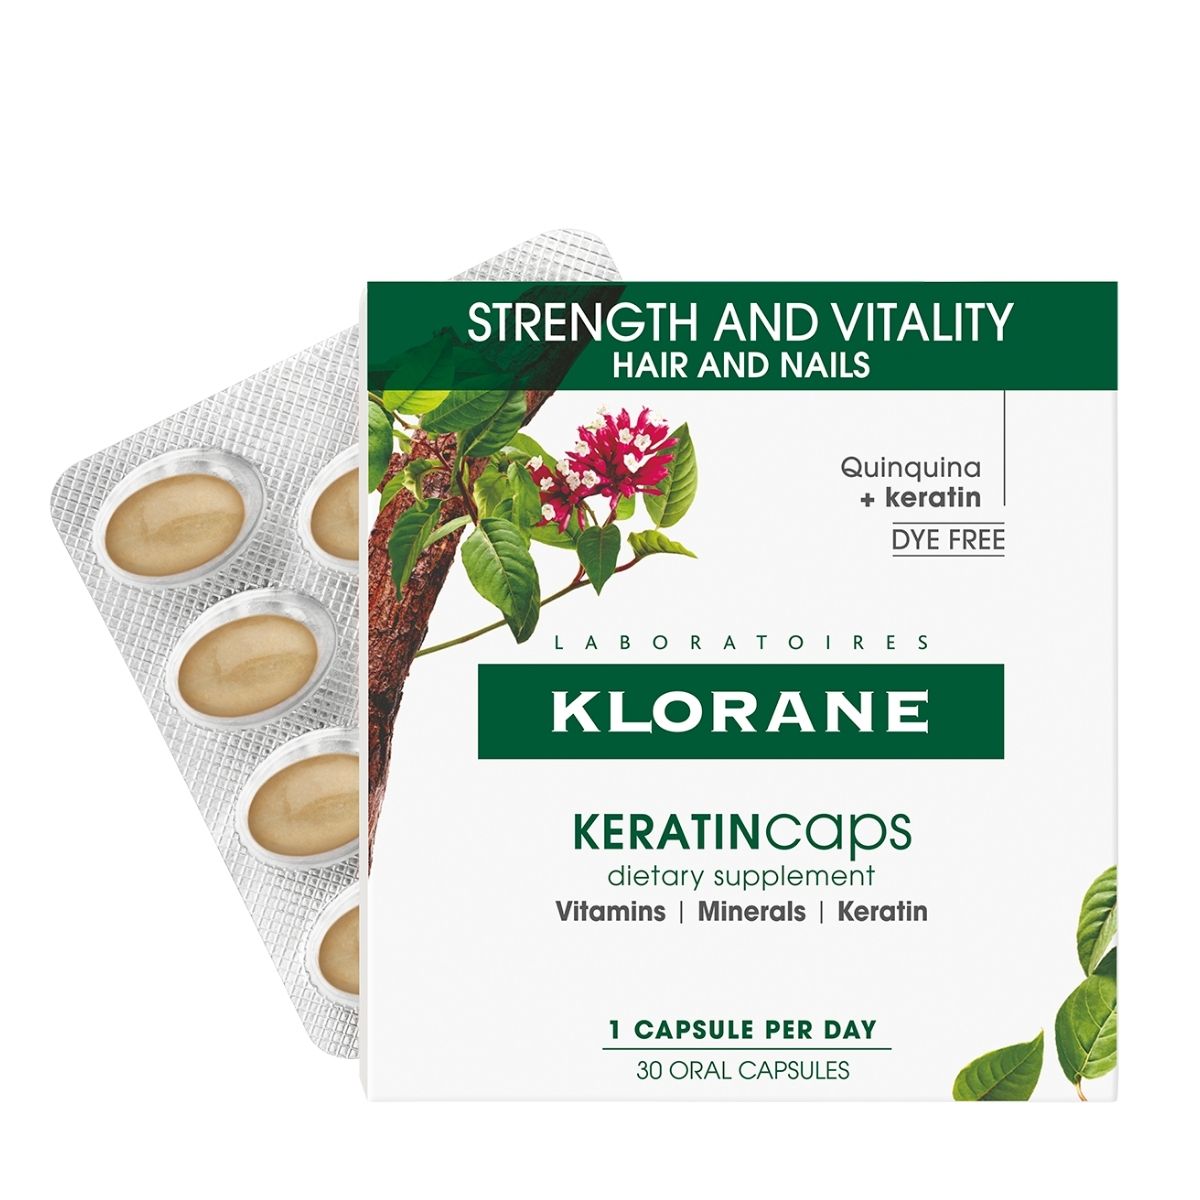 Klorane Hair and Nail Supplement Caps with Keratin